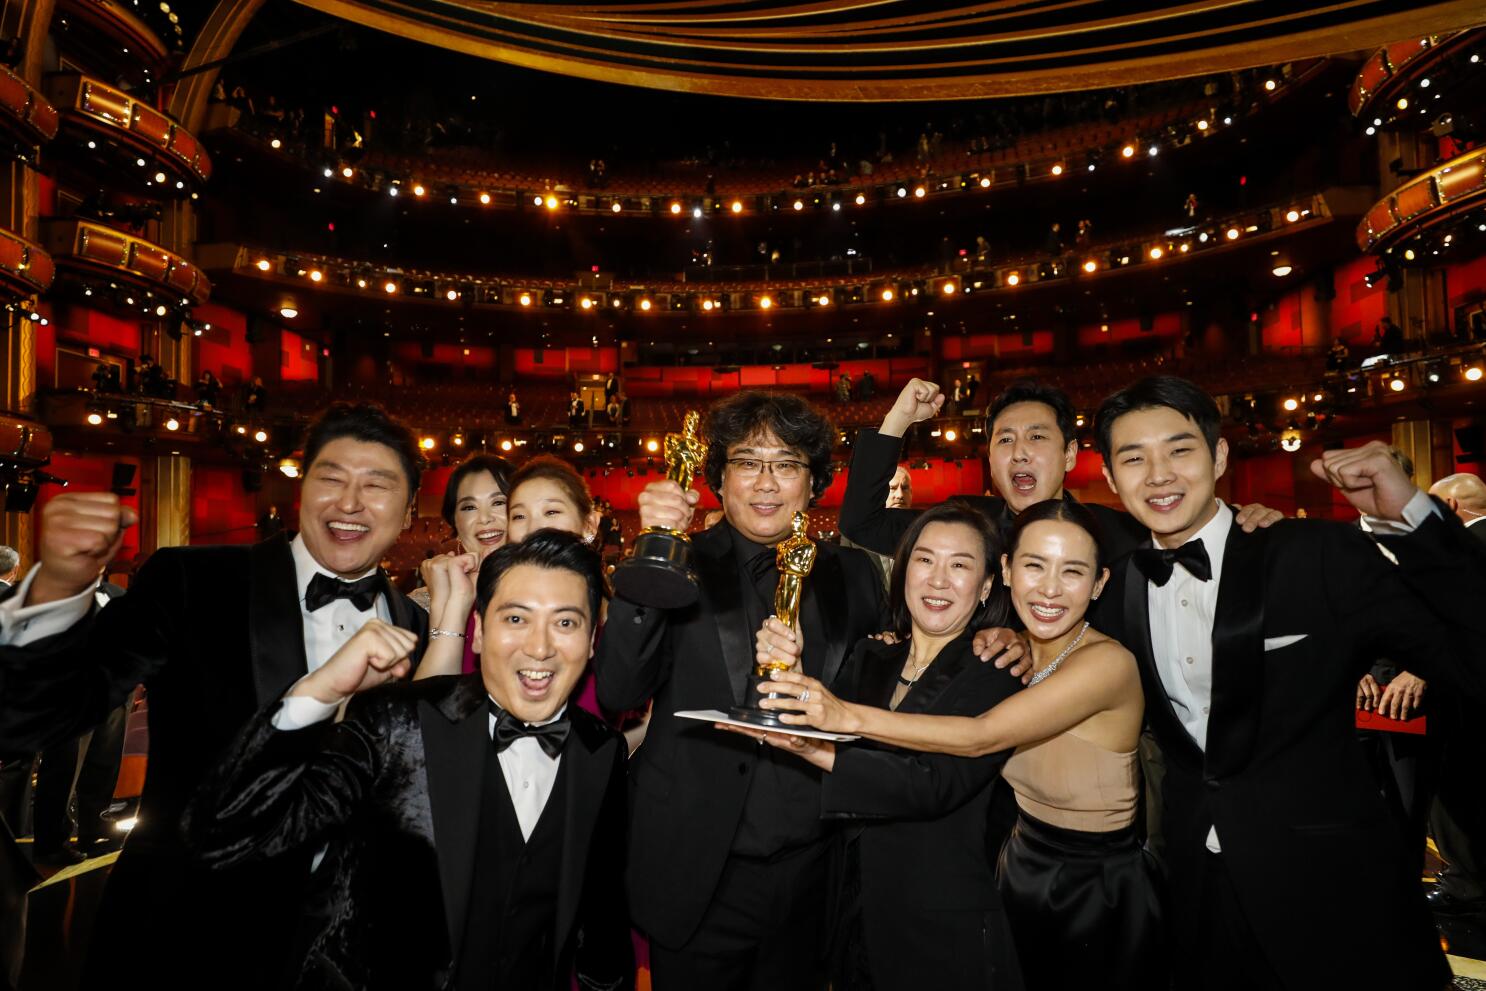 Parasite director Bong Joon Ho and cast members walking on the red carpet  at the 92nd Annual Academy Awards held at the Dolby Theatre in Hollywood,  California on Feb. 9, 2020. (Photo